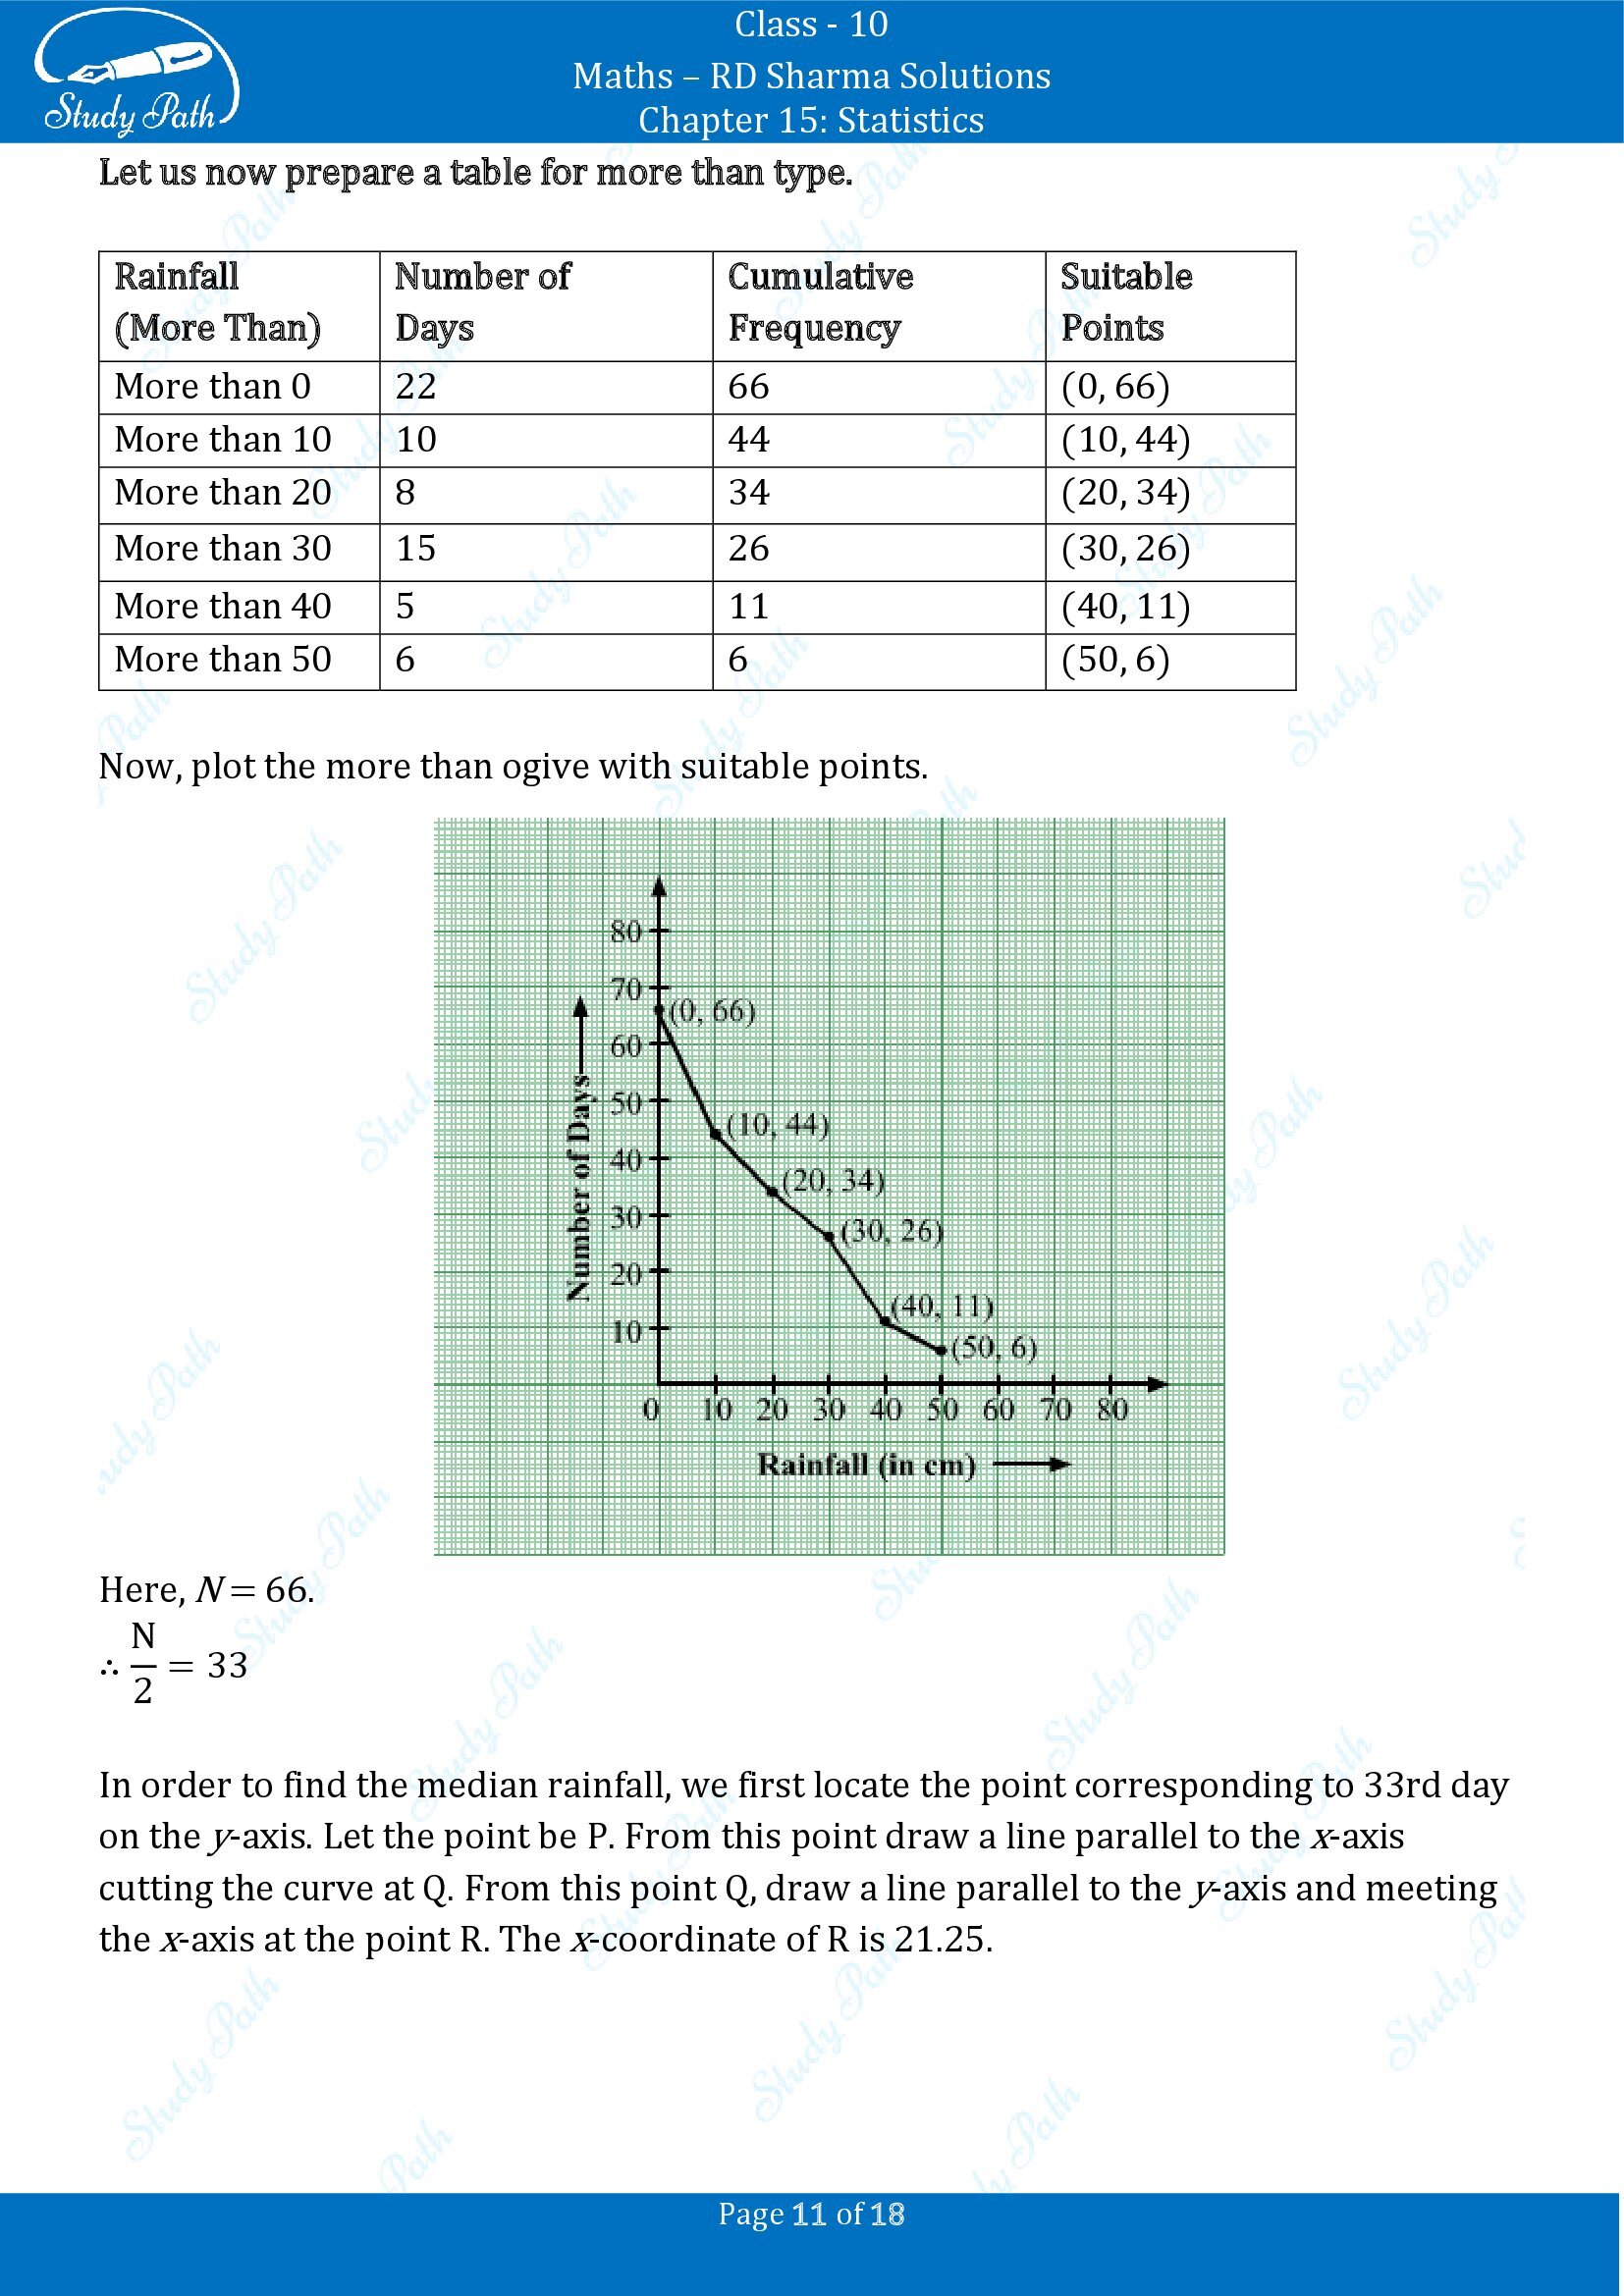 RD Sharma Solutions Class 10 Chapter 15 Statistics Exercise 15.6 00011